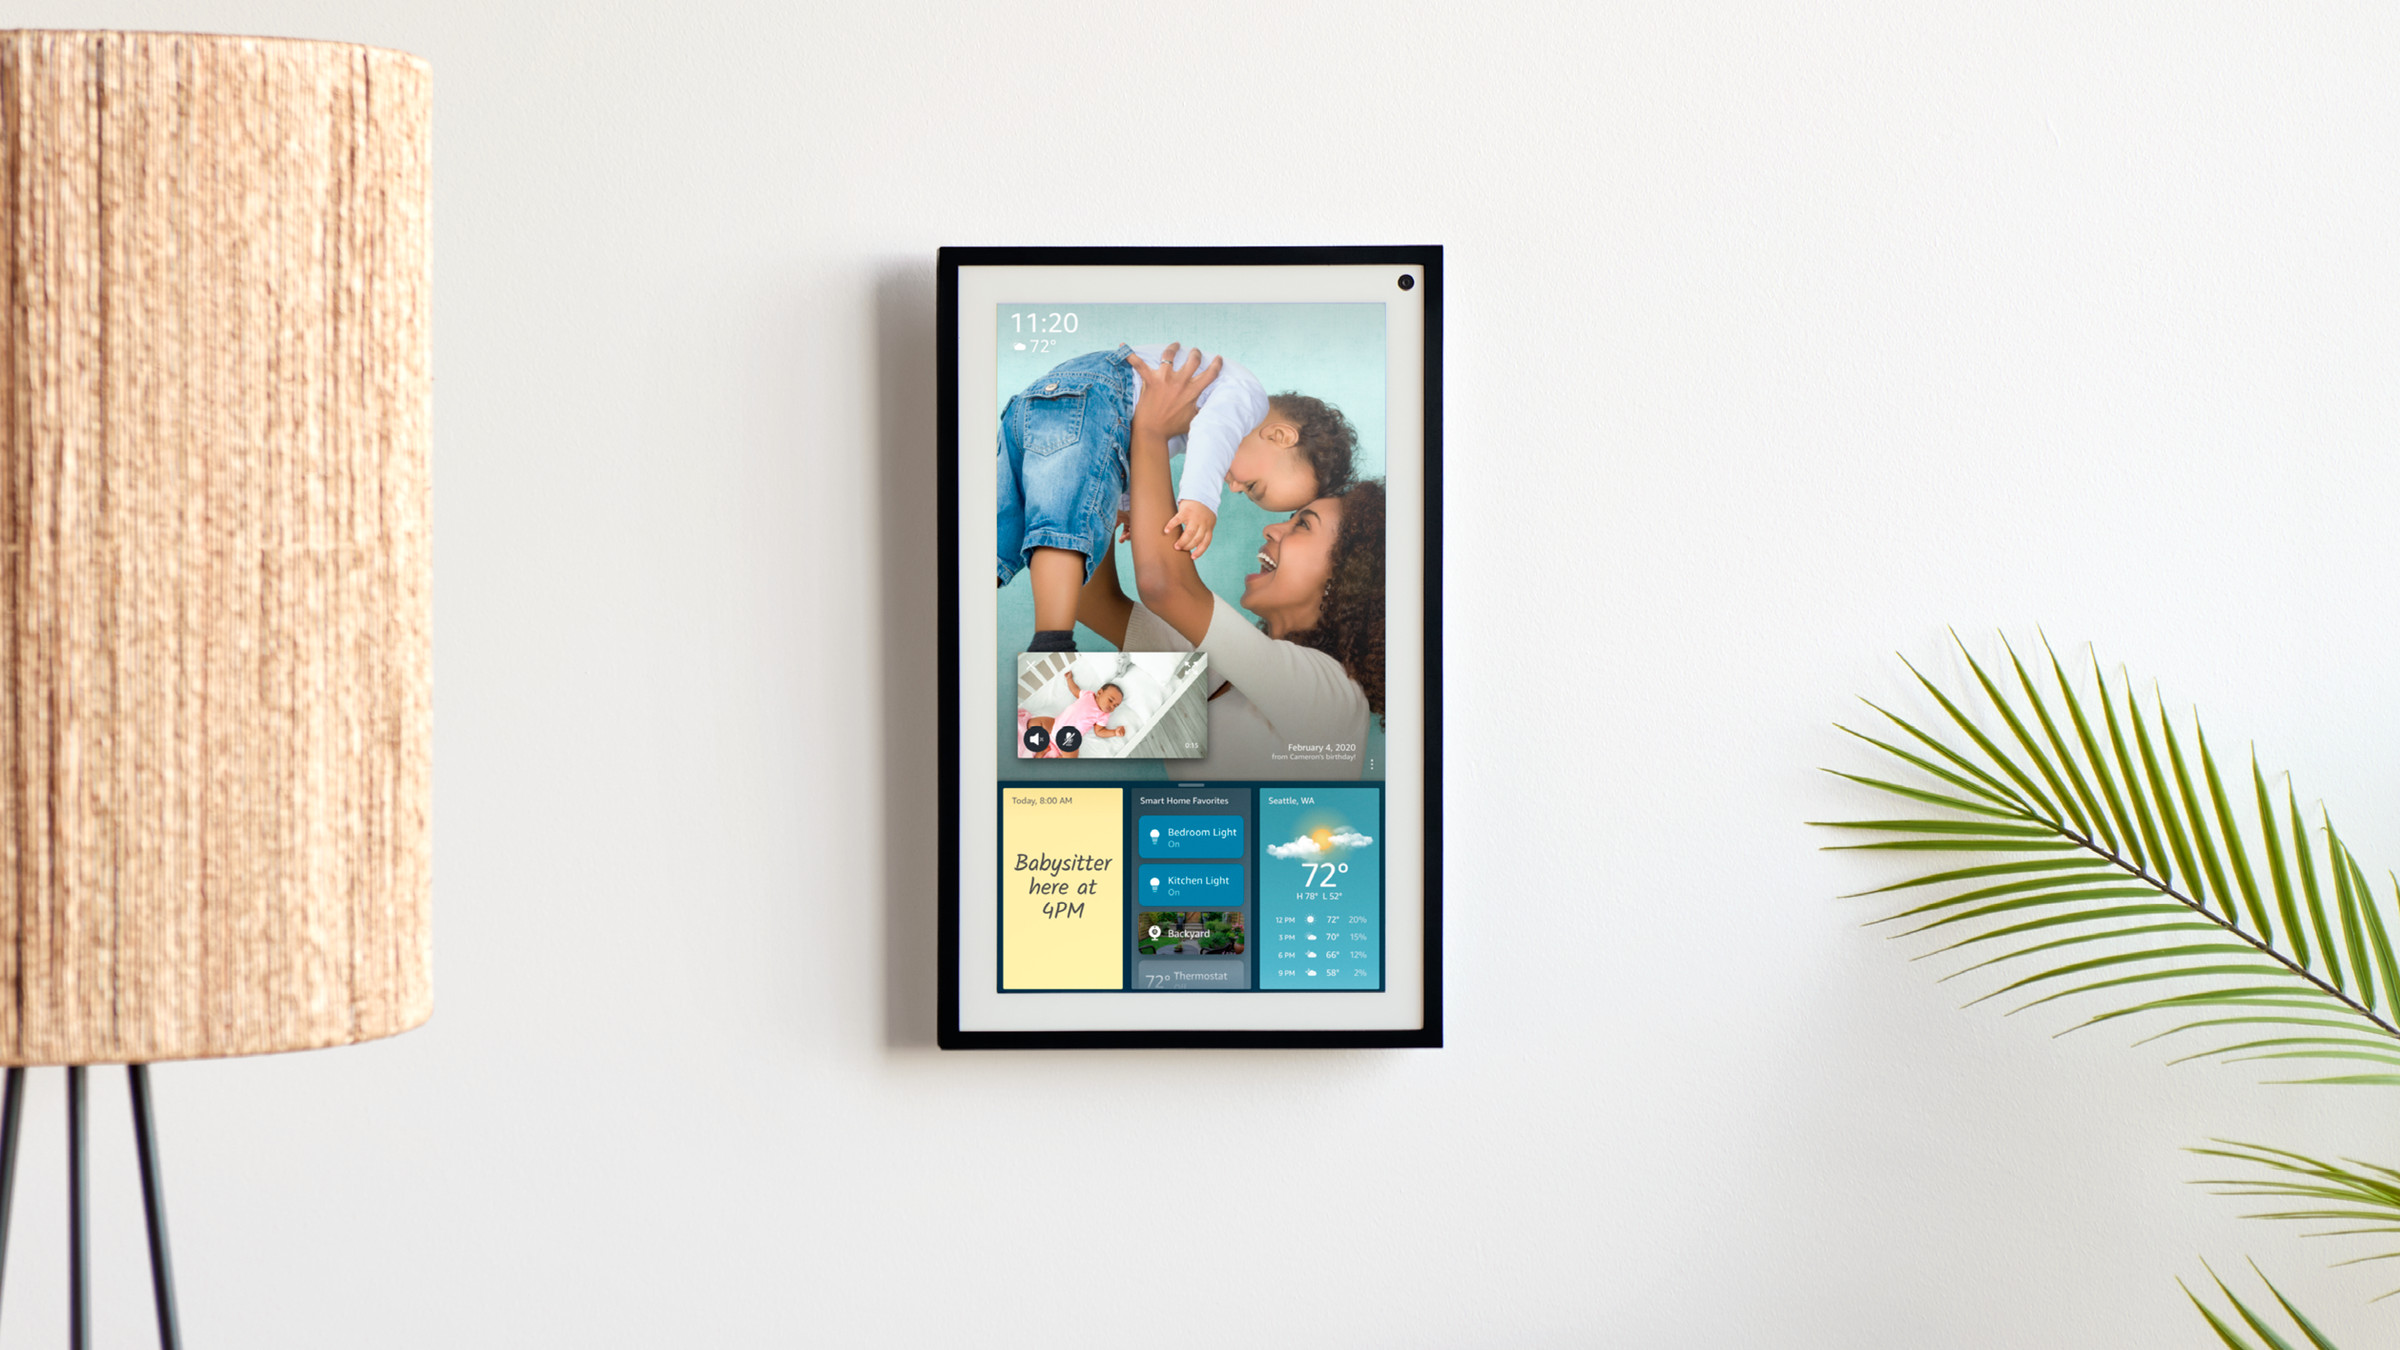 The Echo Show 15 can work in either portrait or landscape orientation.